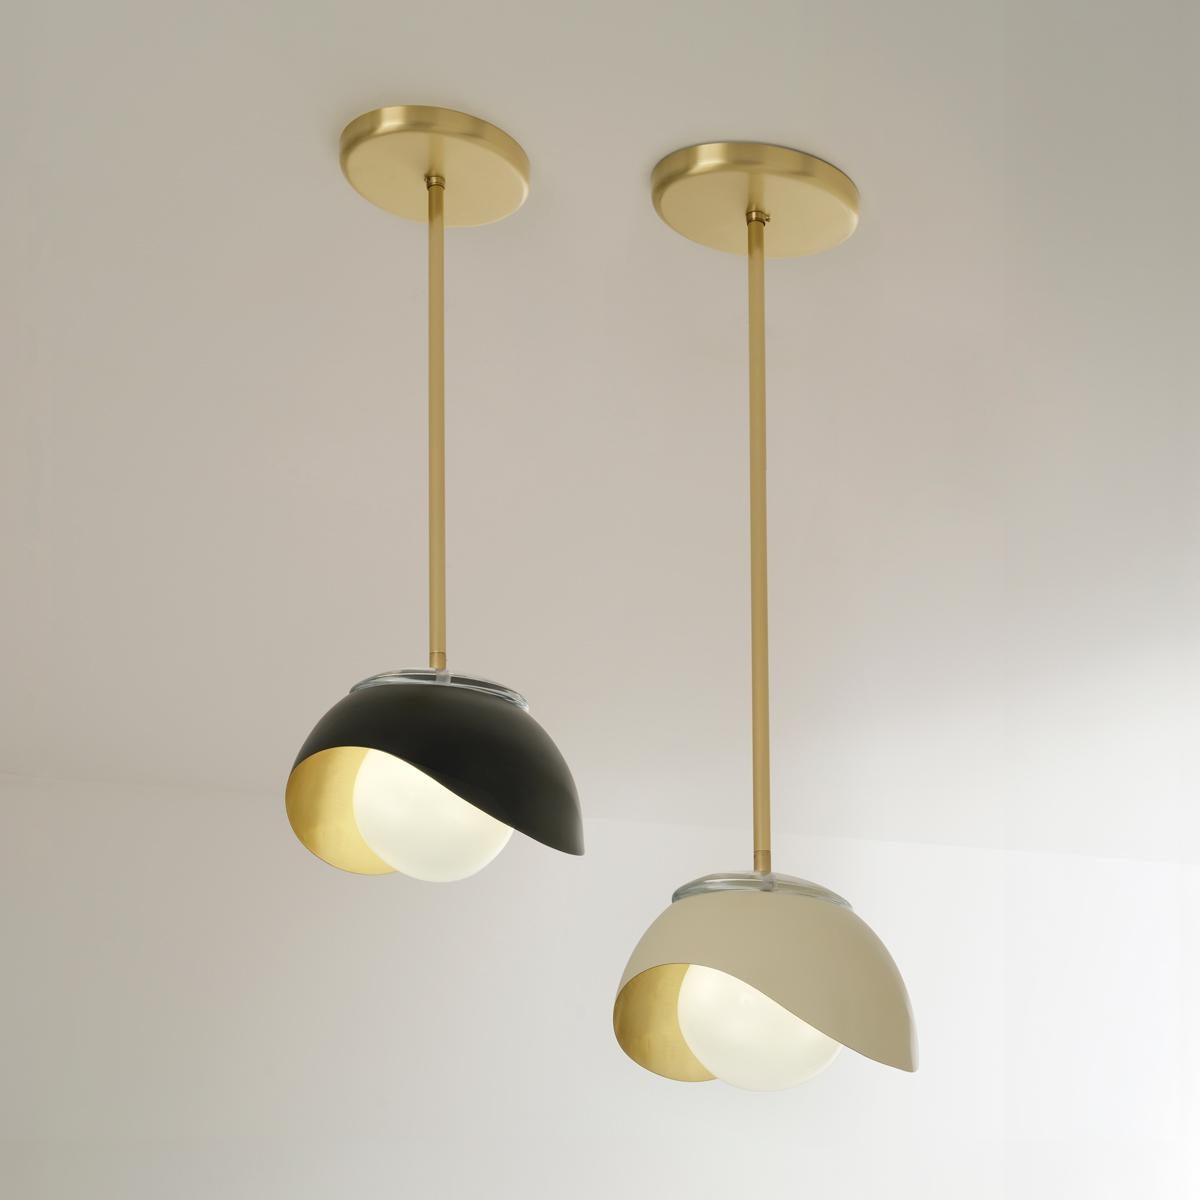 The Perla Pendant features an organic brass shell nestling our Sfera glass handblown in Tuscany. Also available as a flush mount or wall light. See the Perla Mini for the smaller version and the Perla Grande for the larger version.

Shown in the